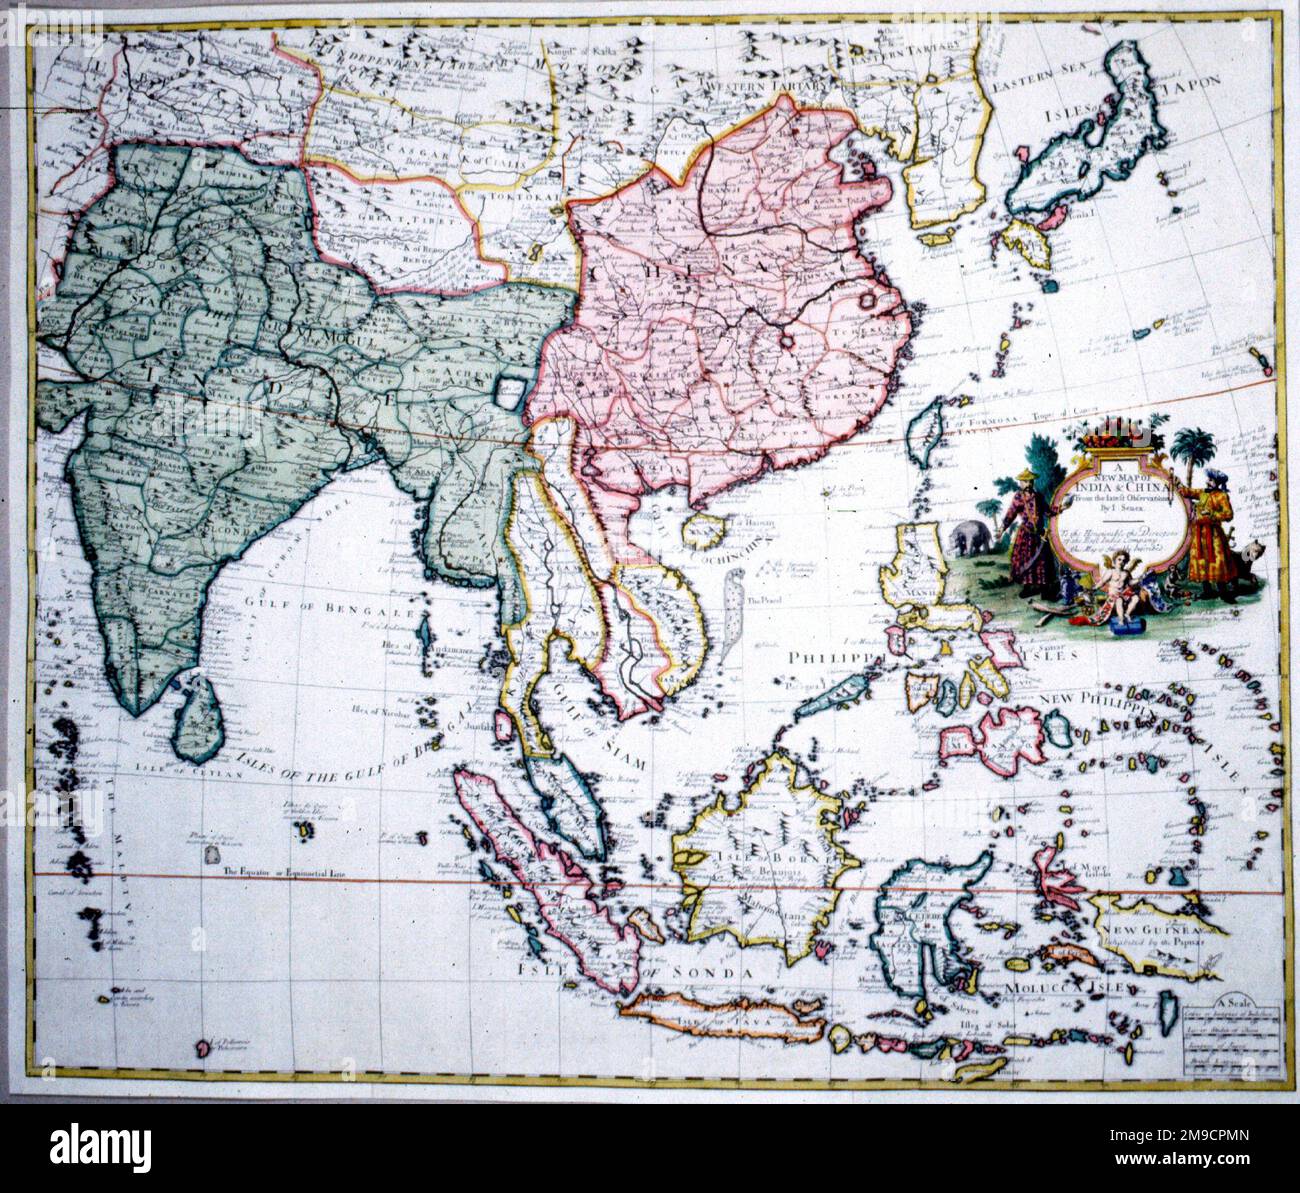 18th century Map of the East Indies Stock Photo